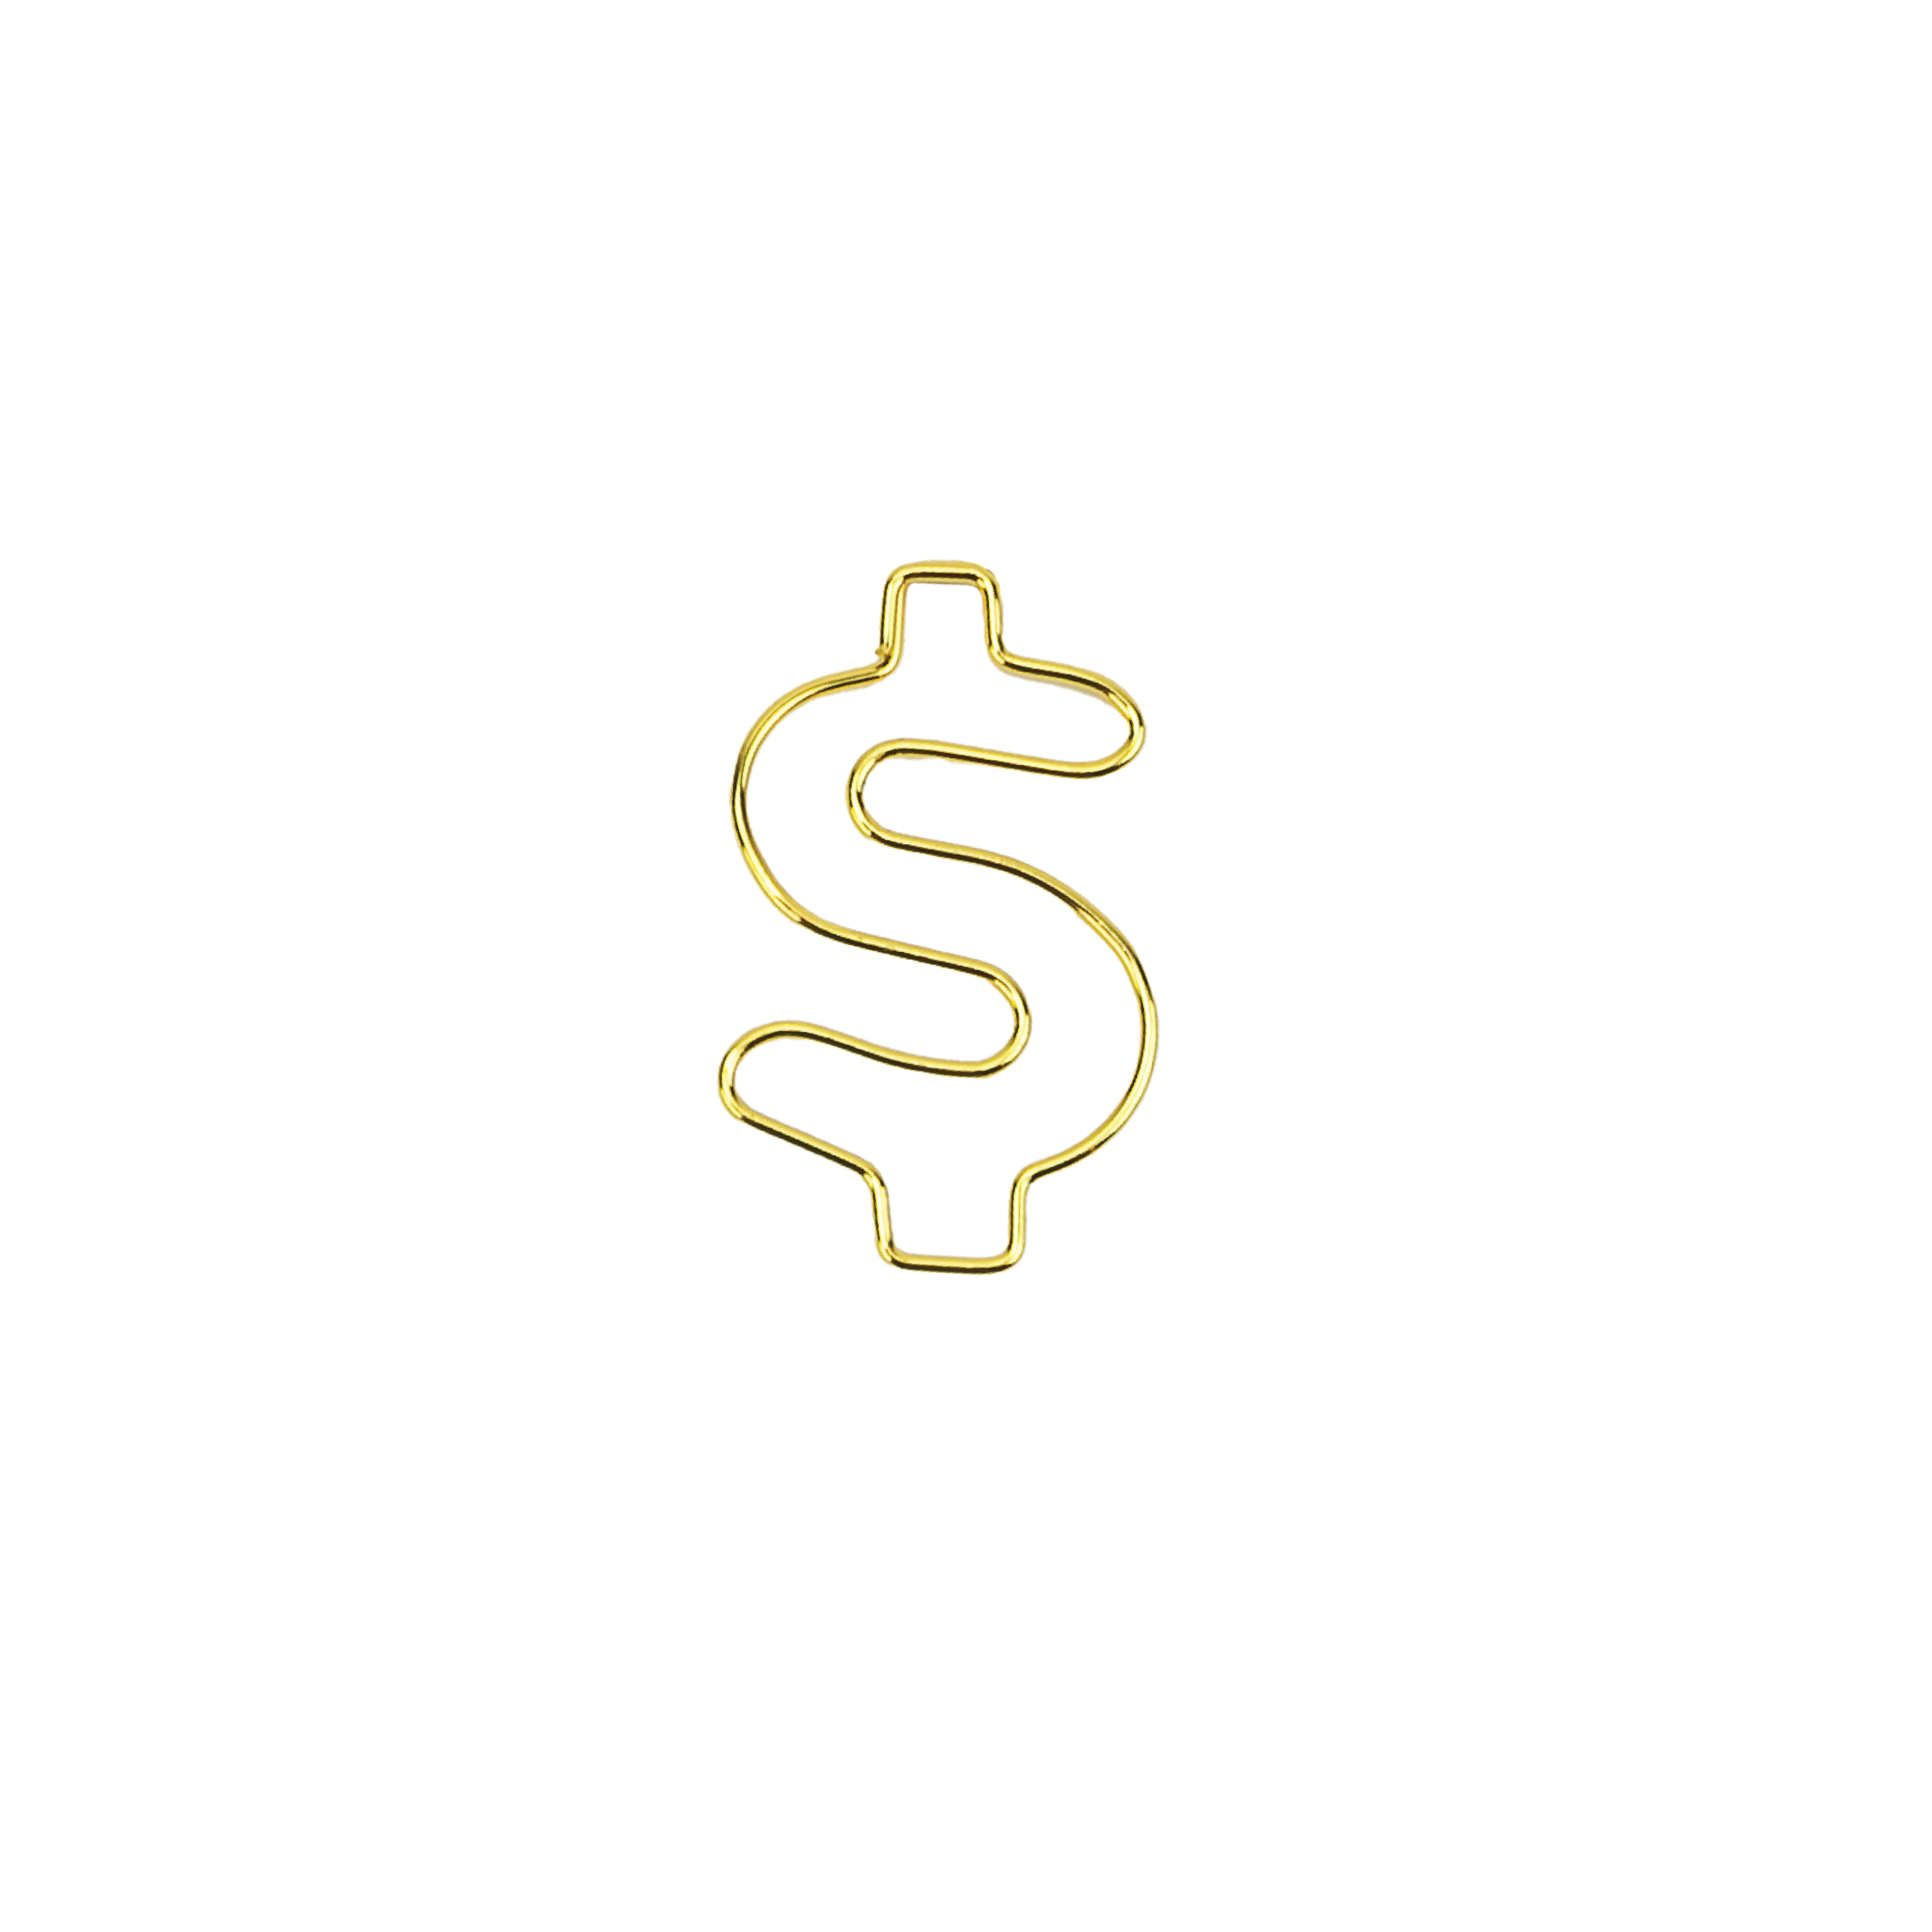 Dollar Sign - 25 Gold Paperclips